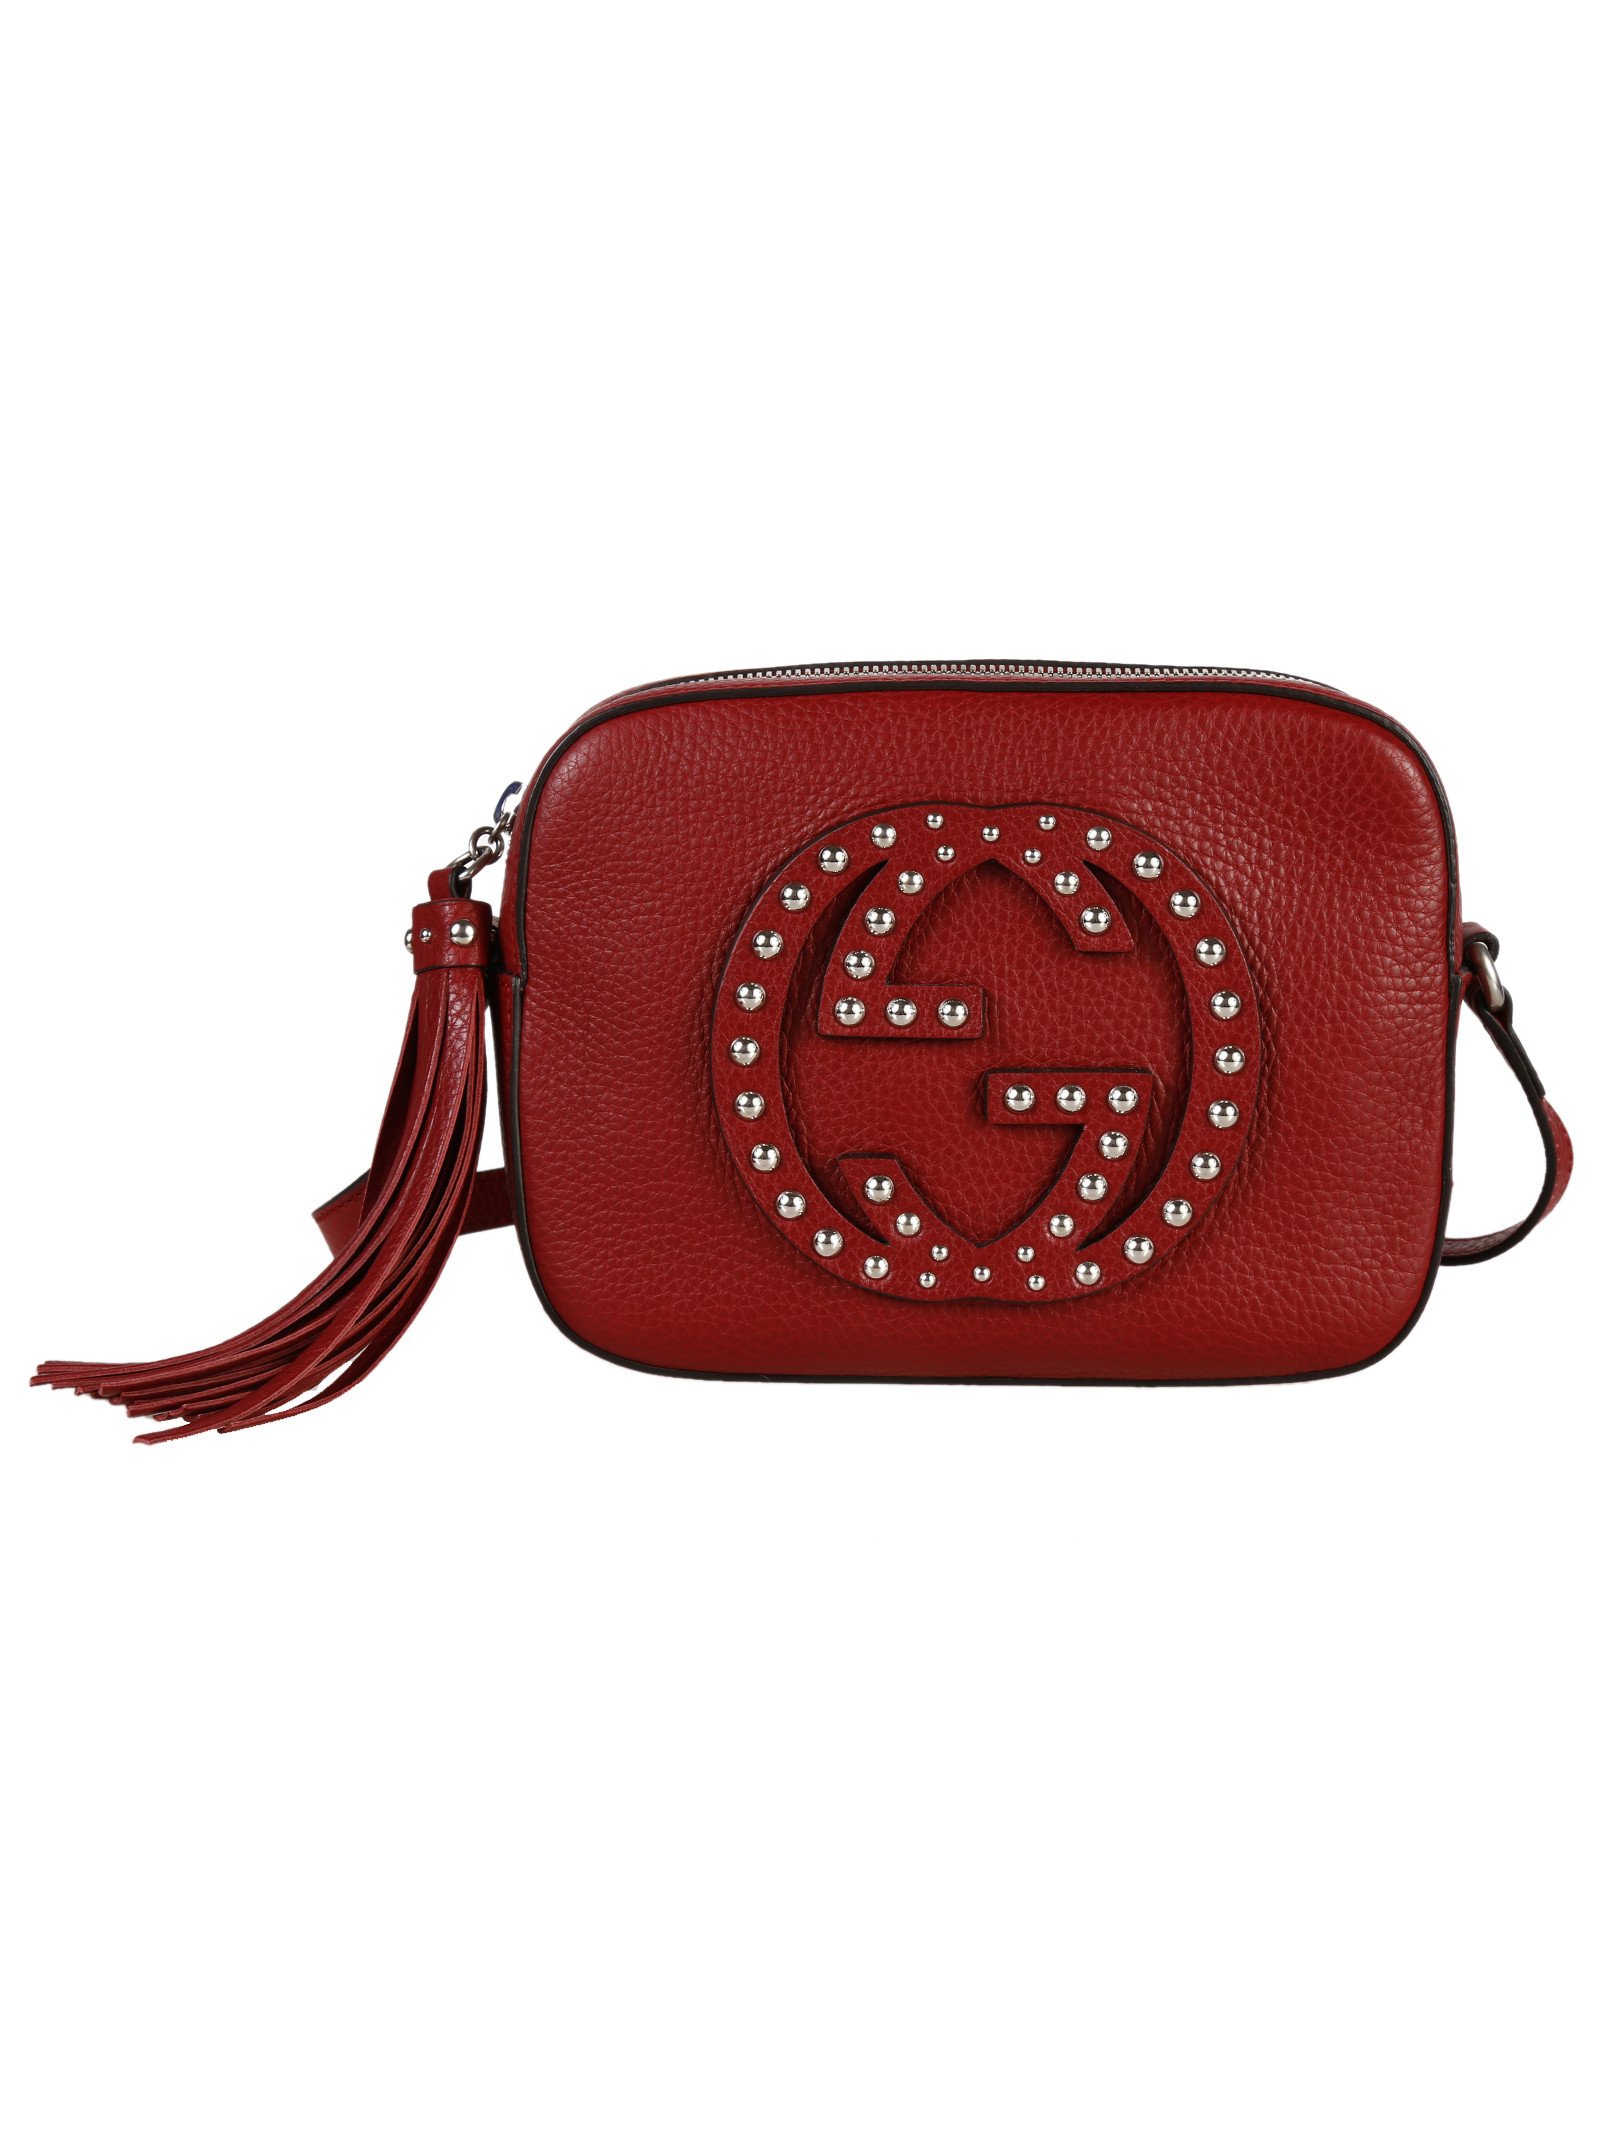 Gucci Soho Studded Leather Disco Bag in Red (Bordeaux) | Lyst